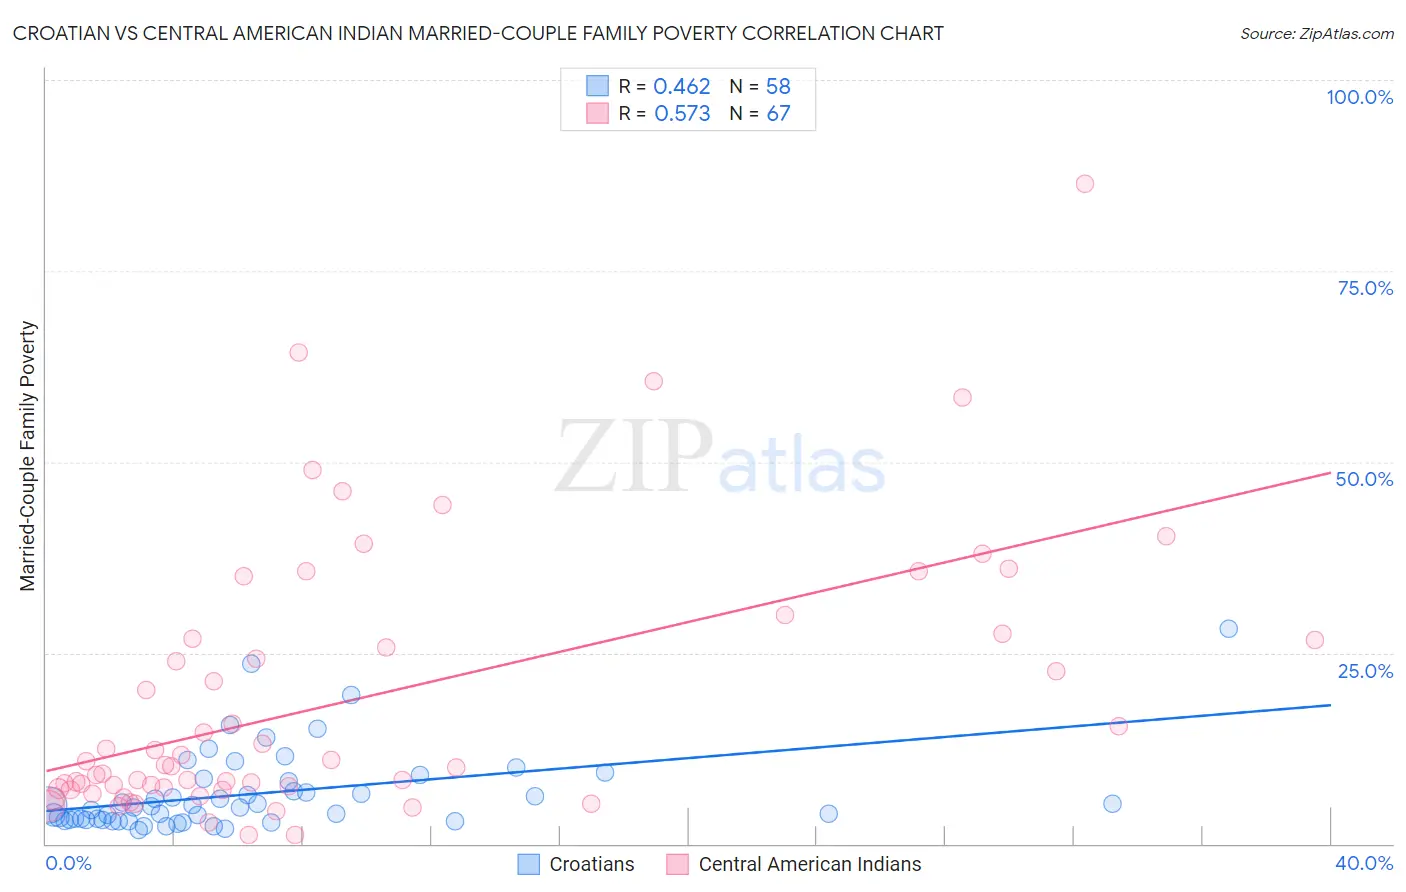 Croatian vs Central American Indian Married-Couple Family Poverty